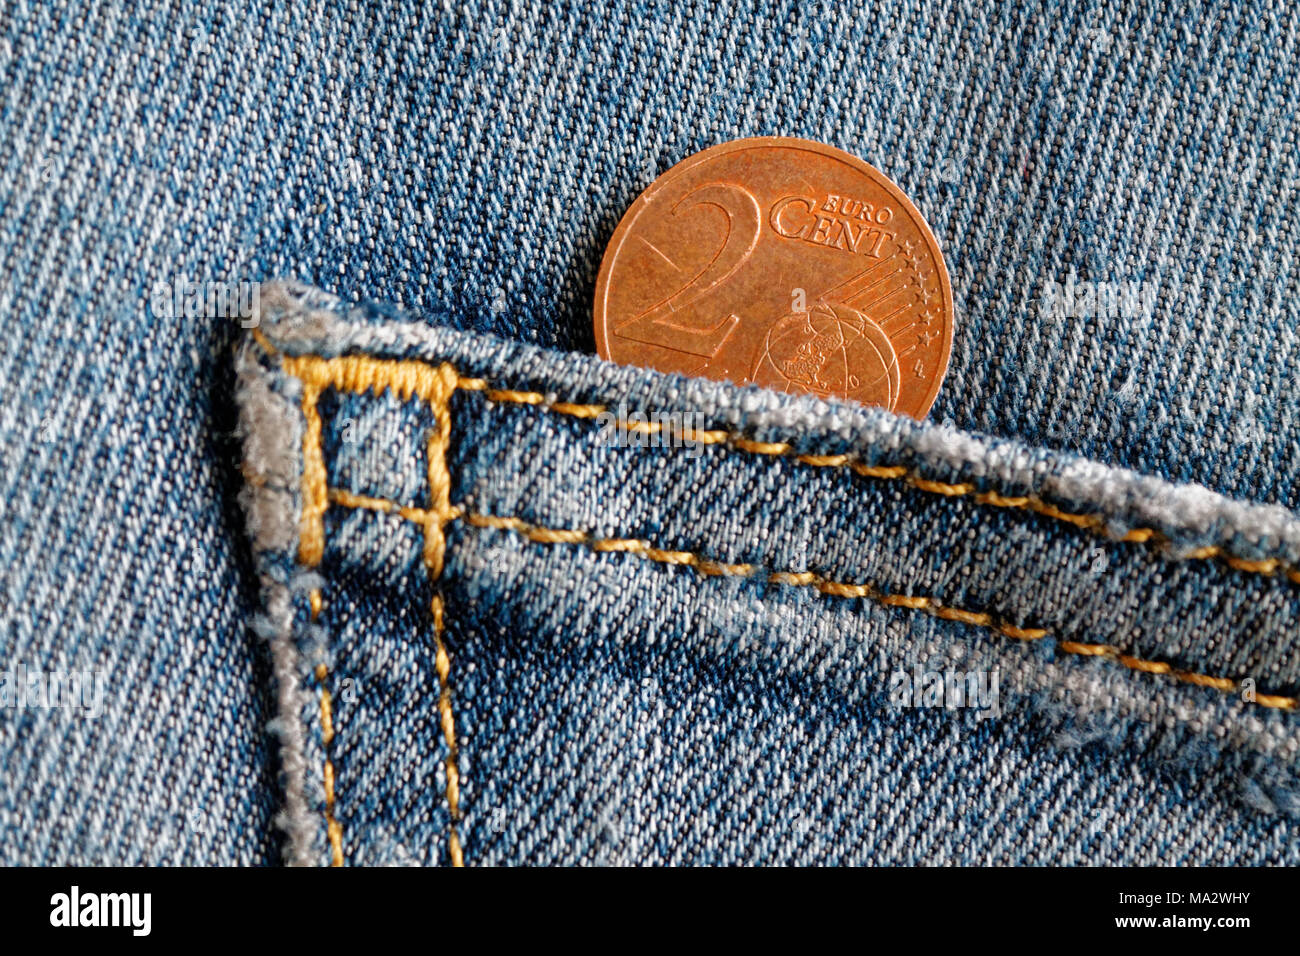 Euro coin with a denomination of 2 euro cent in the pocket of old blue denim jeans Stock Photo